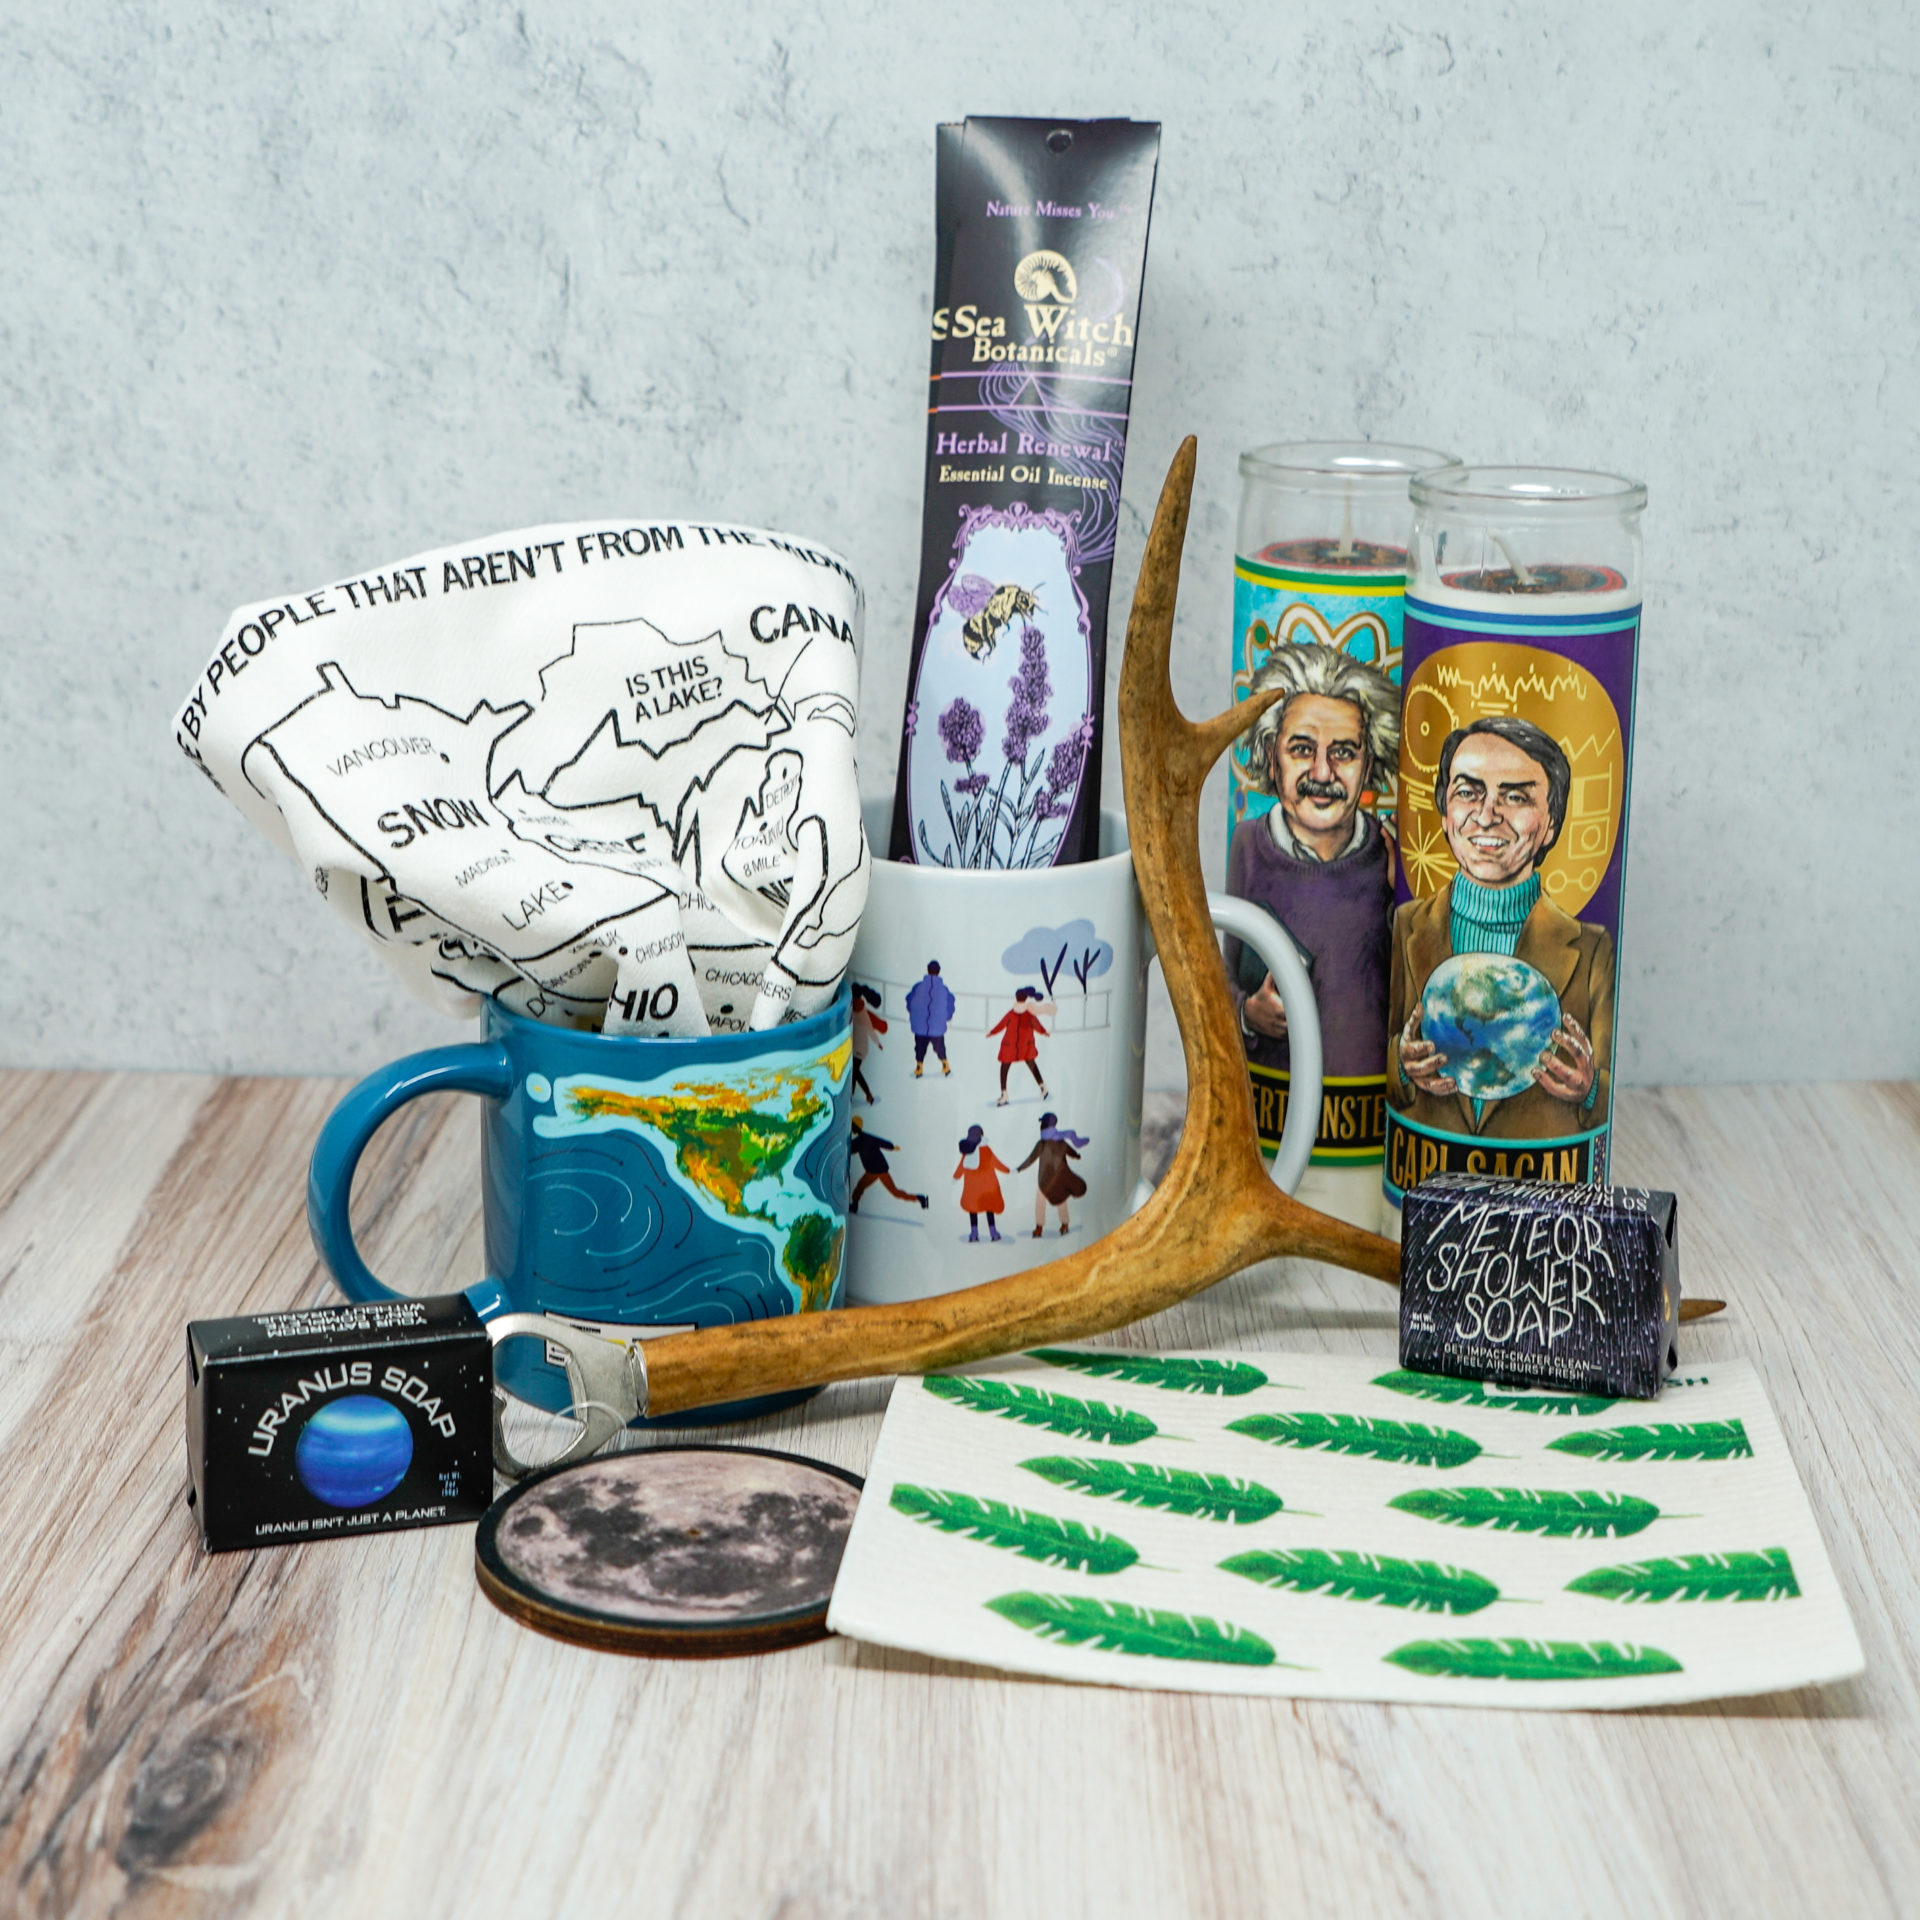 An assortment of home related gifts such as candles, mugs, and rags